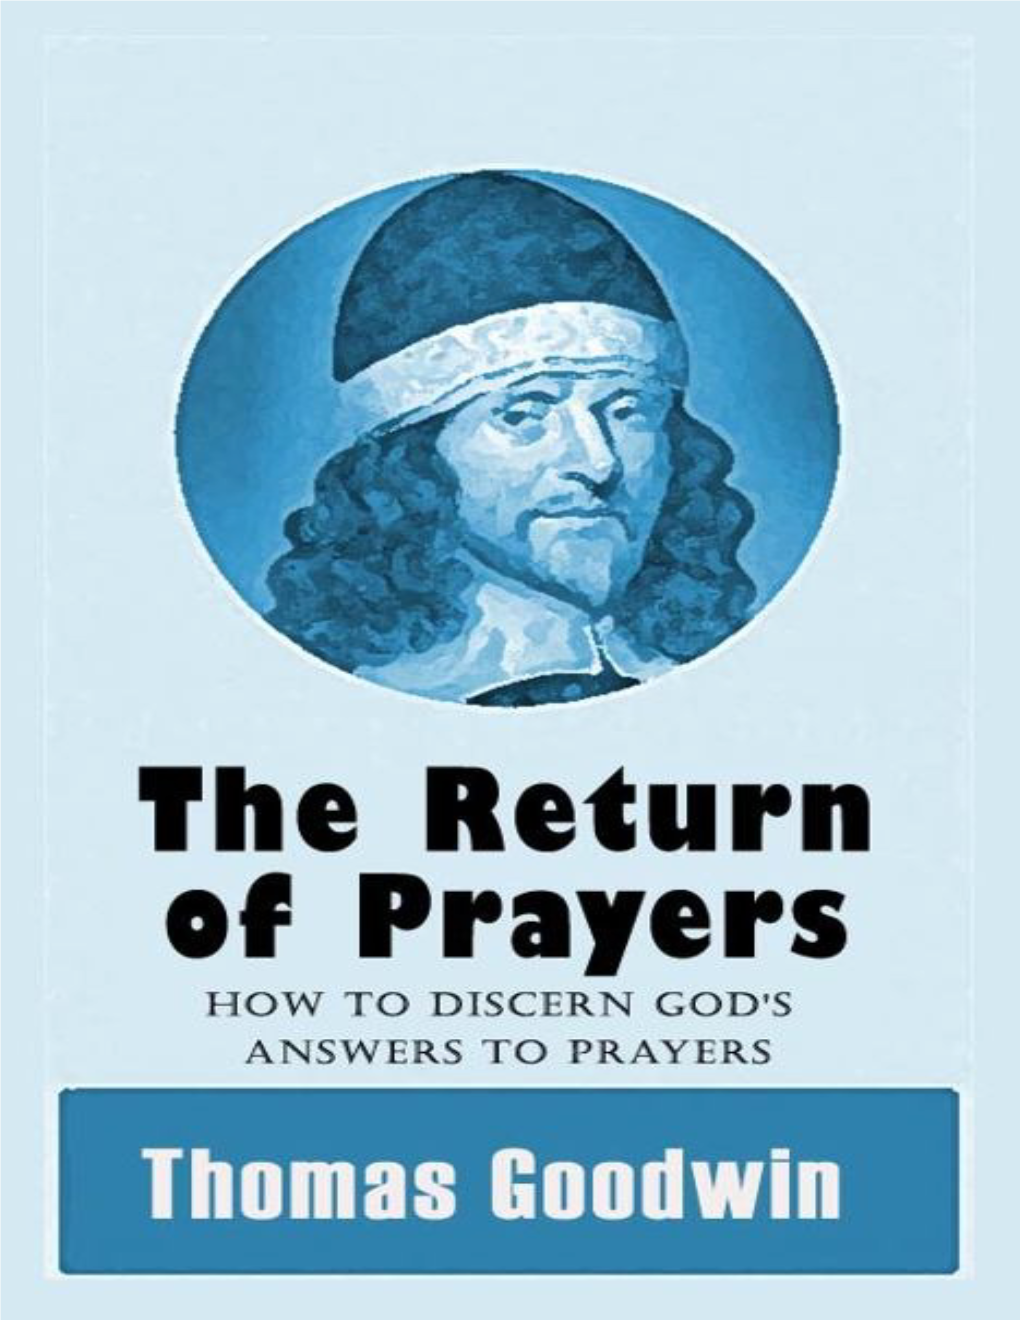 The Return of Prayers: How to Discern God's Answers to Prayers